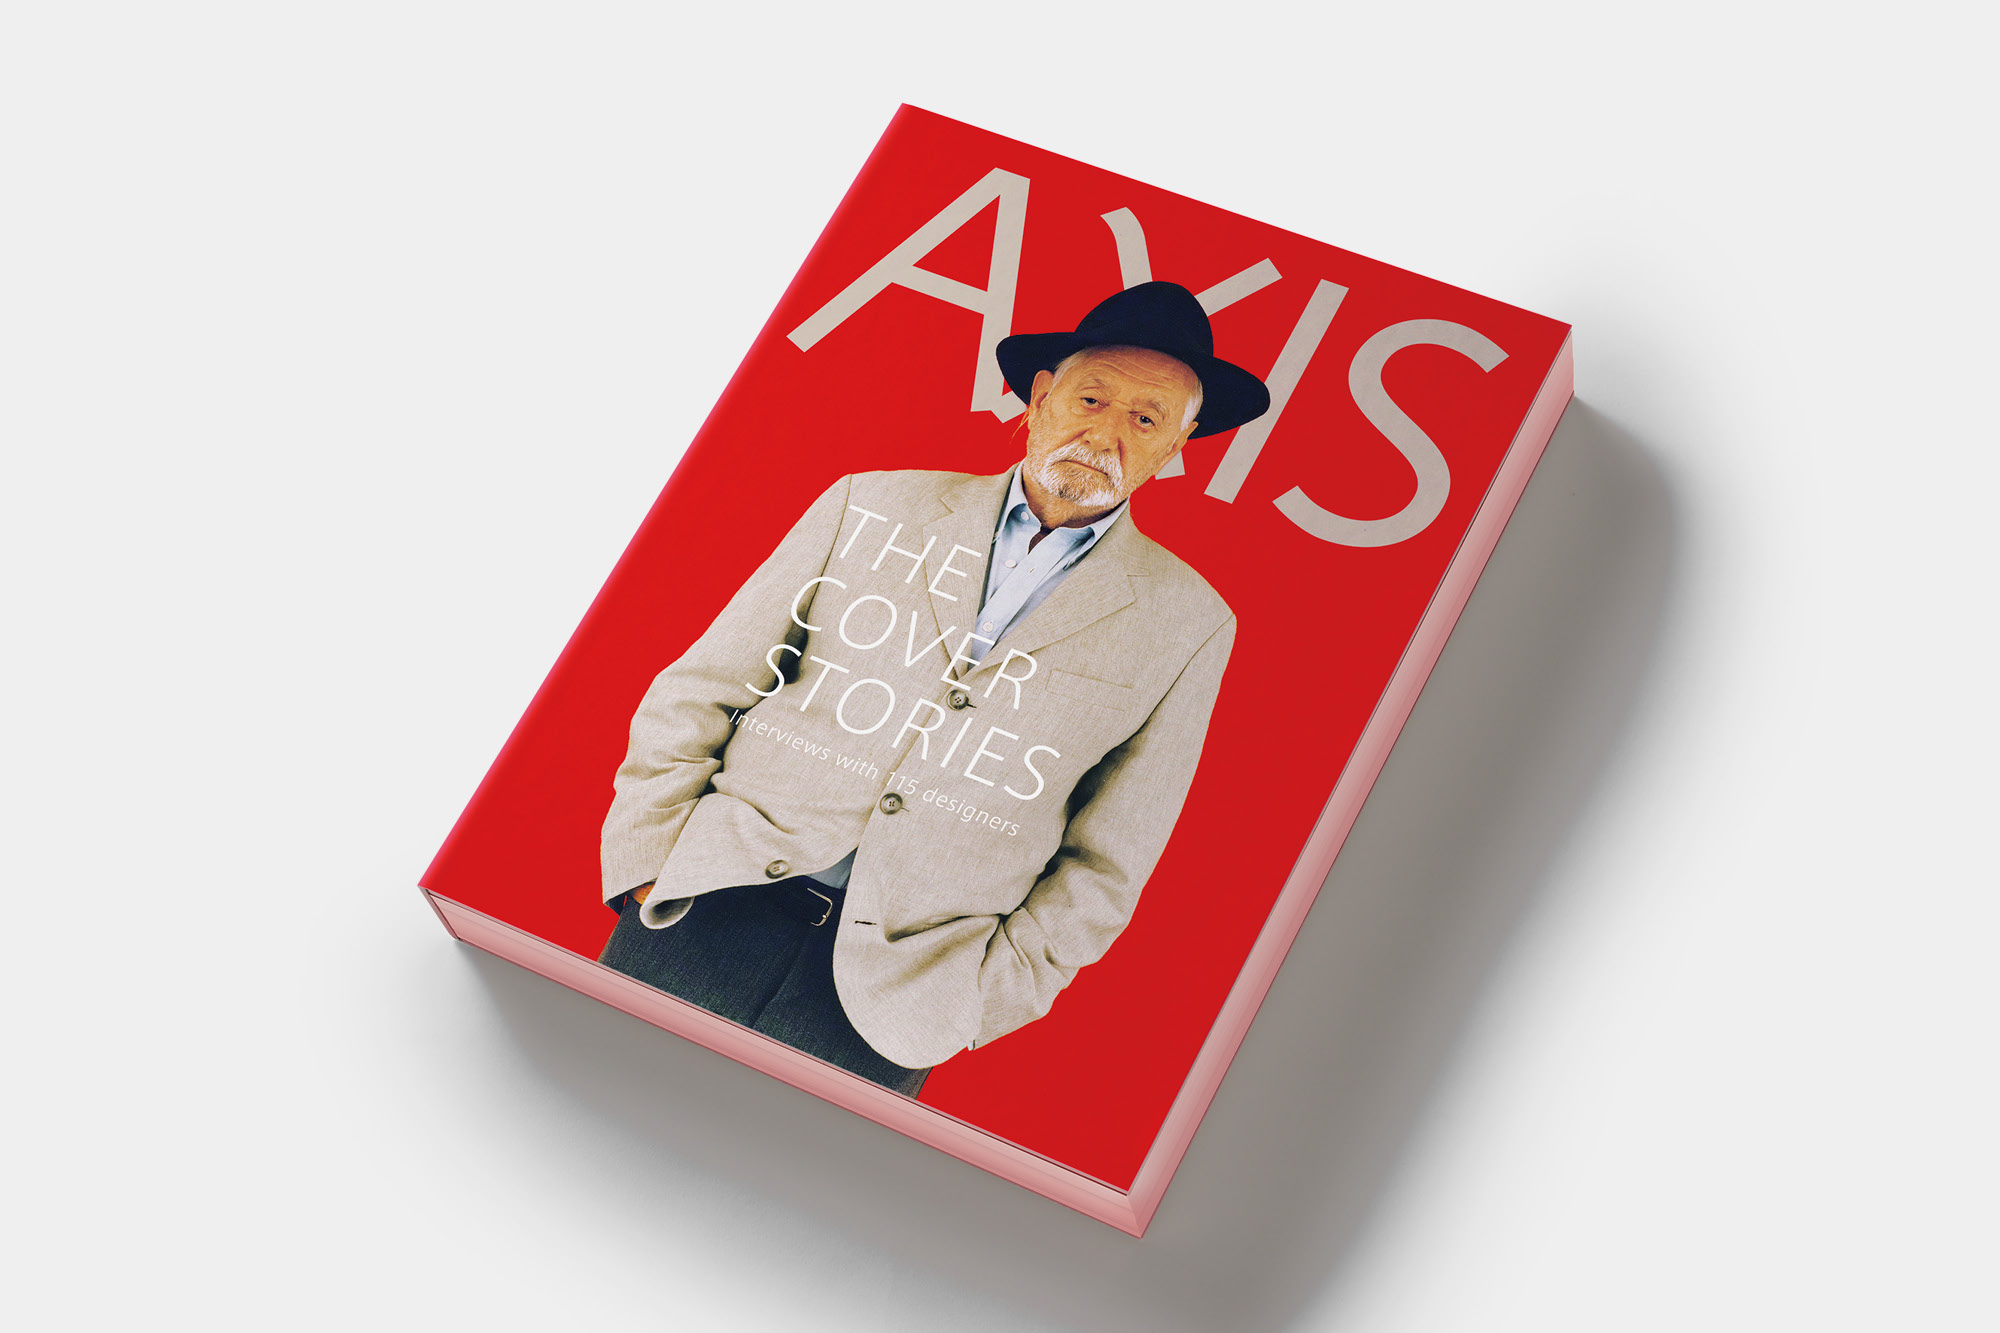 『AXIS THE COVER STORIES ─ Interviews with 115 designers』